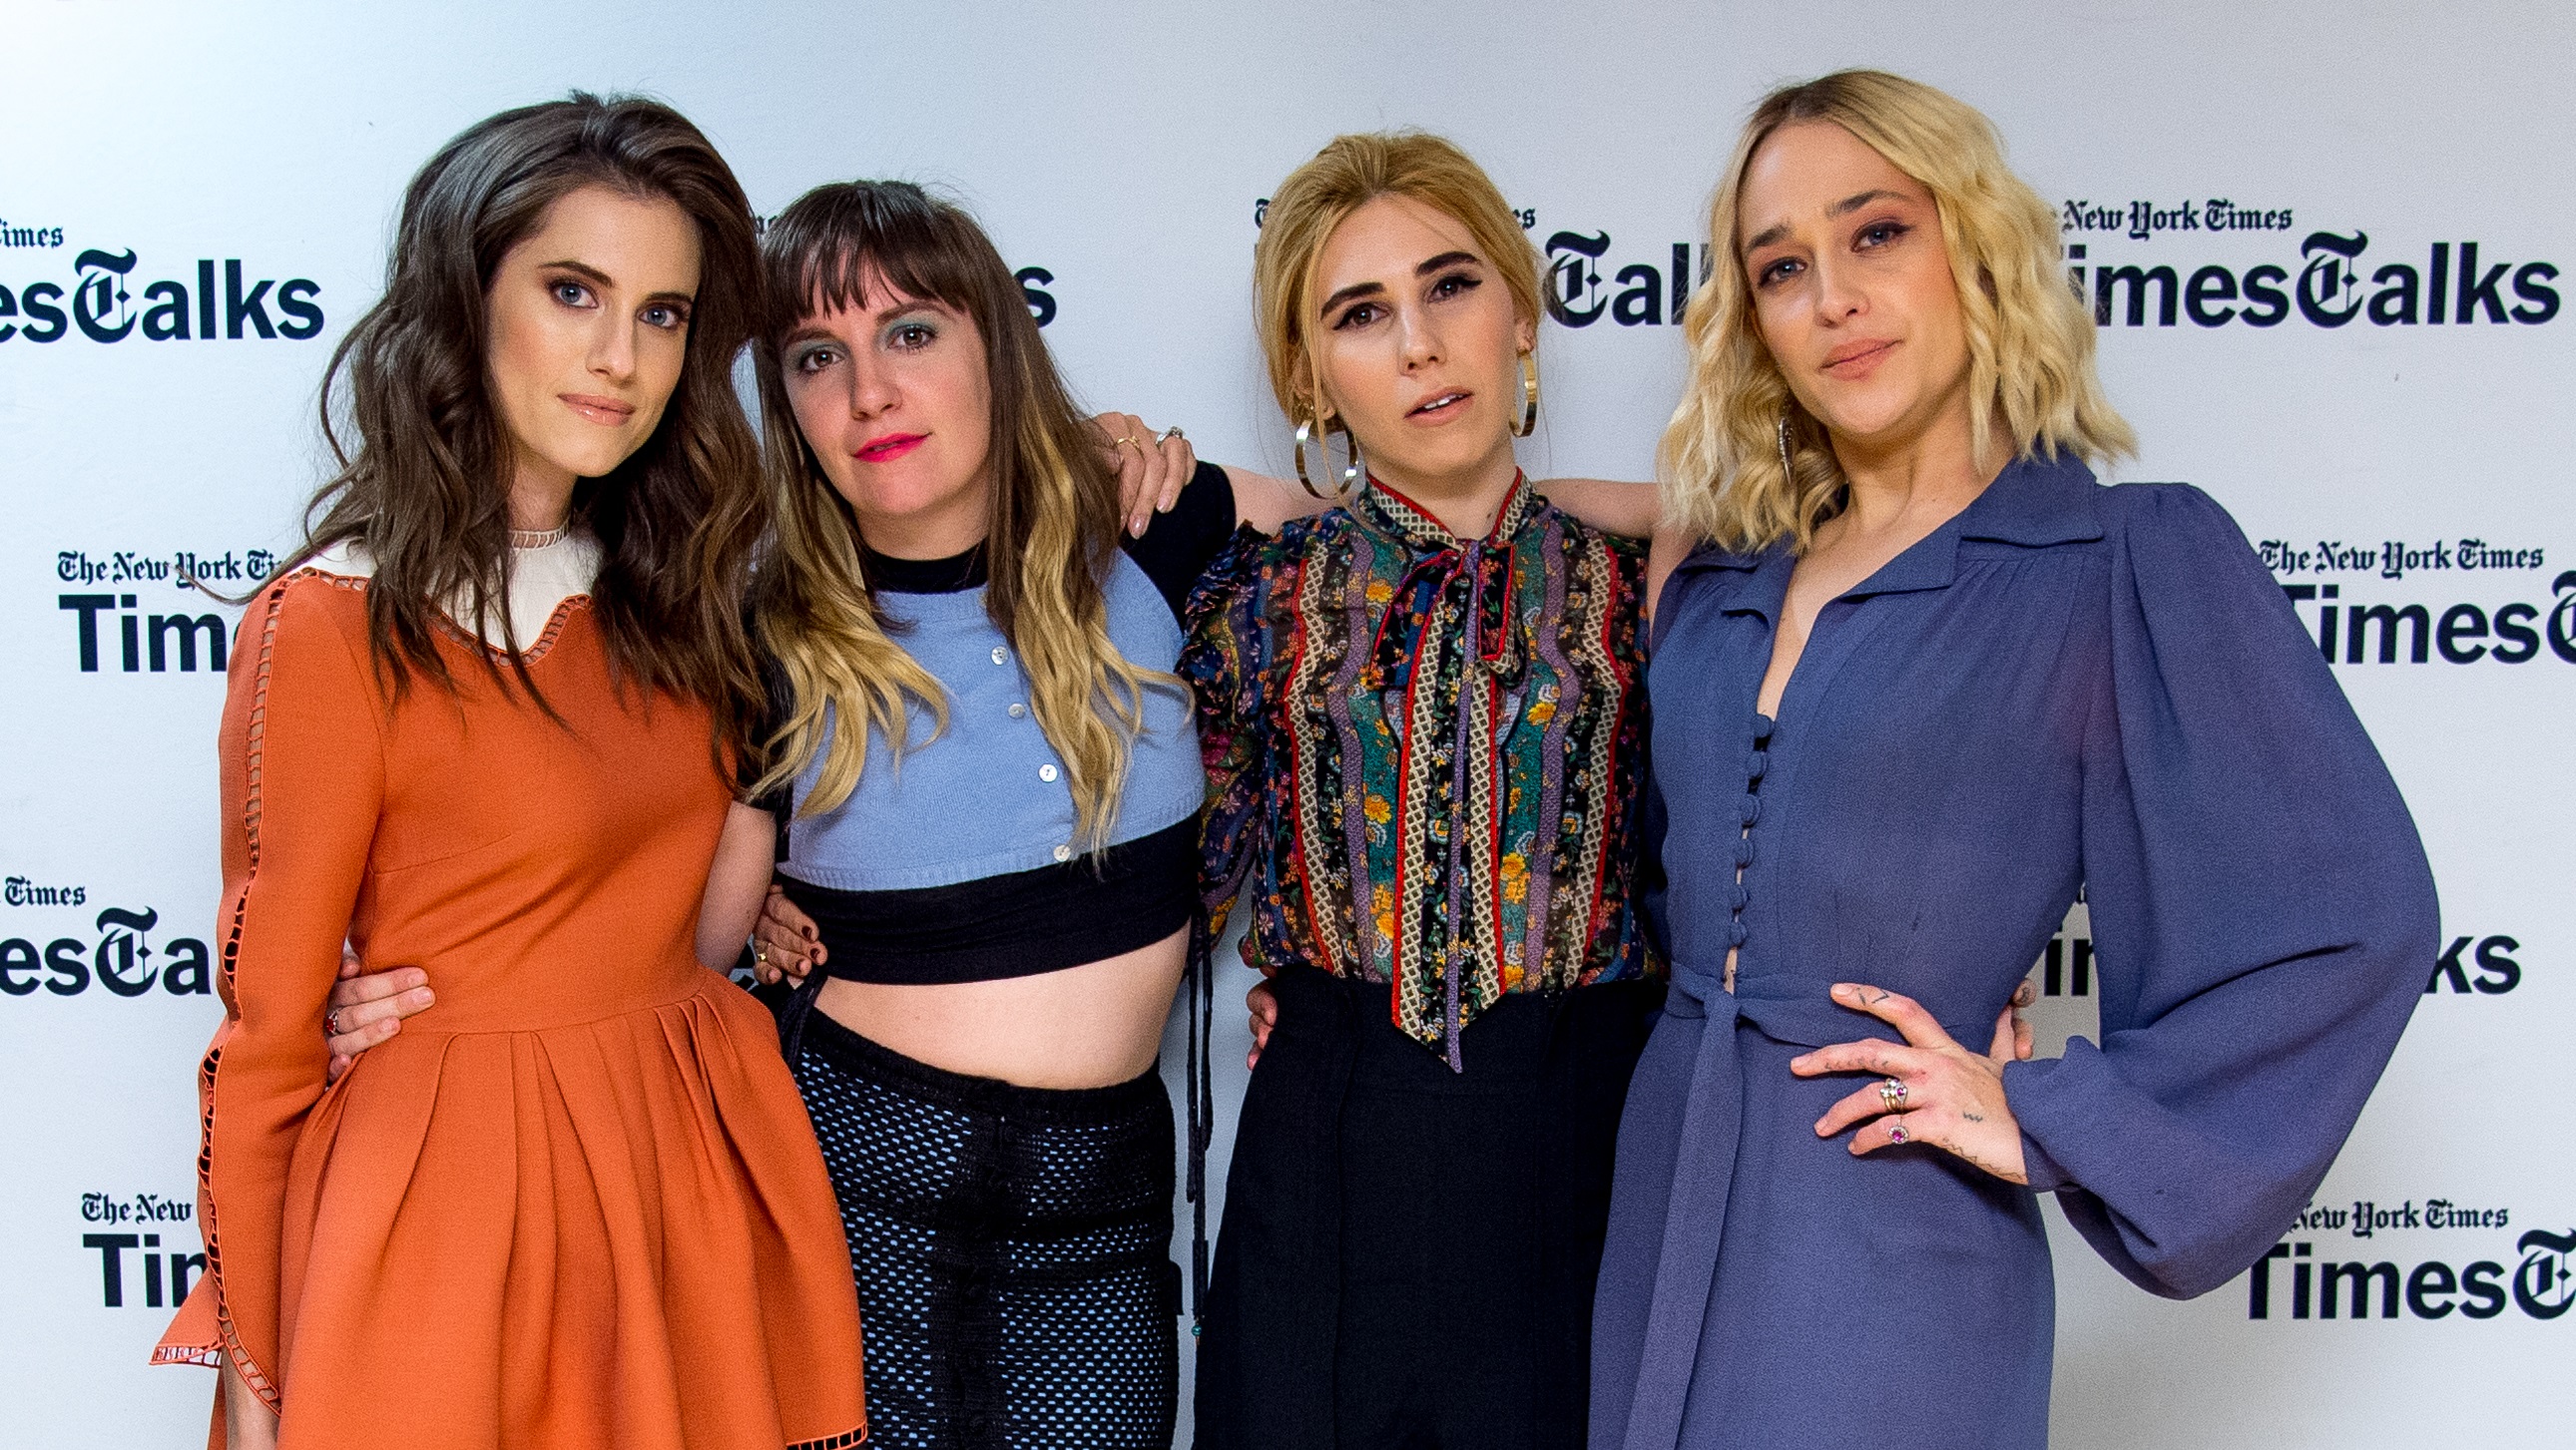 Lena Dunham Gives Her Take on a 'Girls' TV Reboot